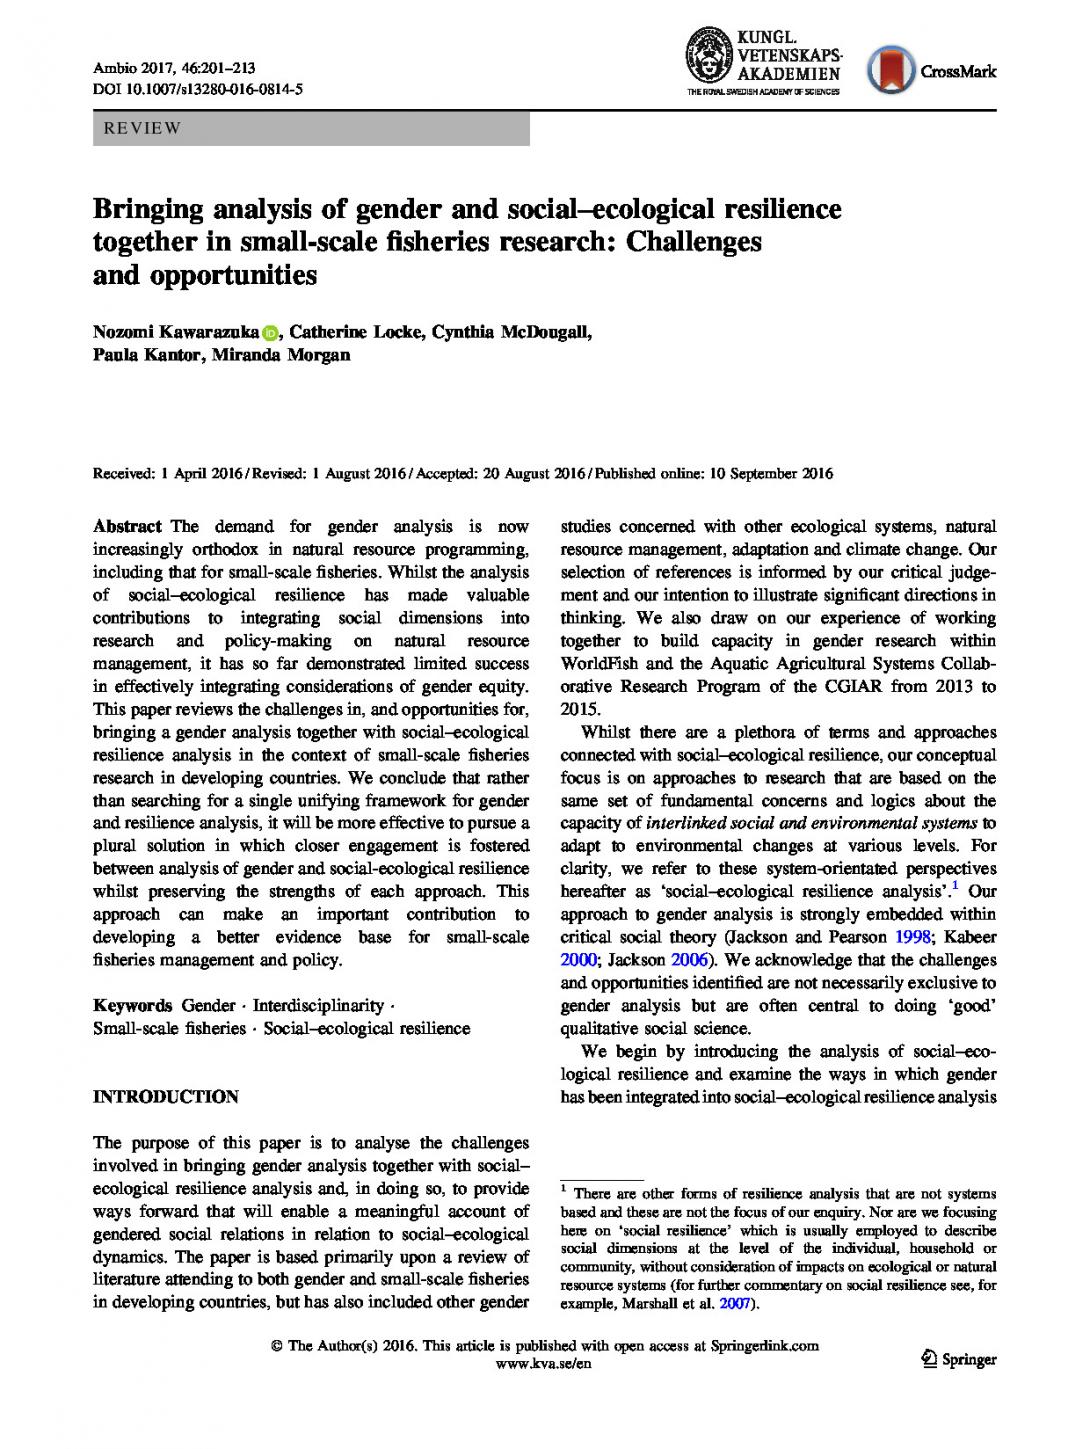 Bringing analysis of gender and social-ecological resilience together in small-scale fisheries research: Challenges and opportunities